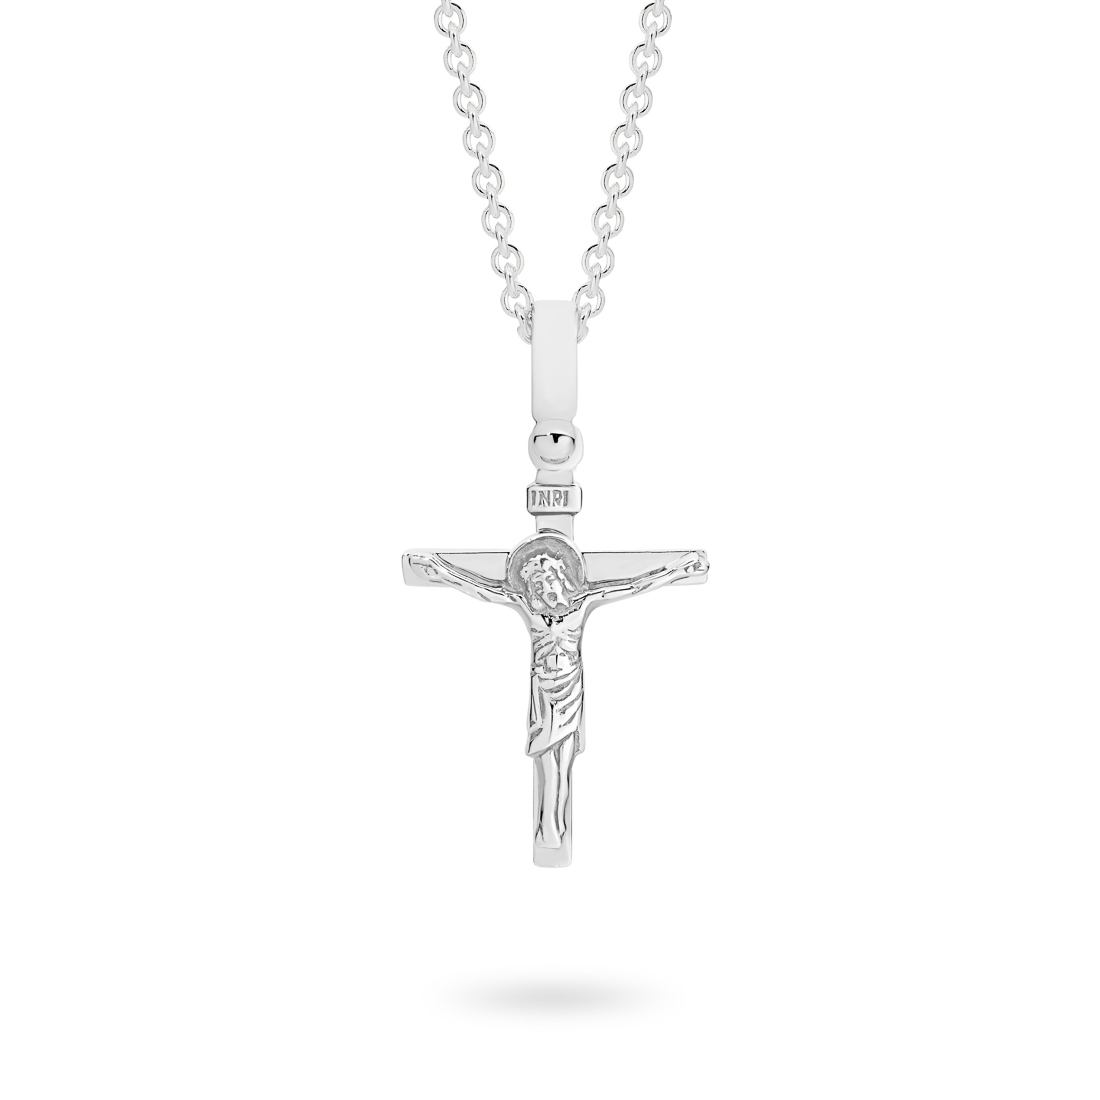 18K White Gold Polished Crucifix Pendant With INRI Plate